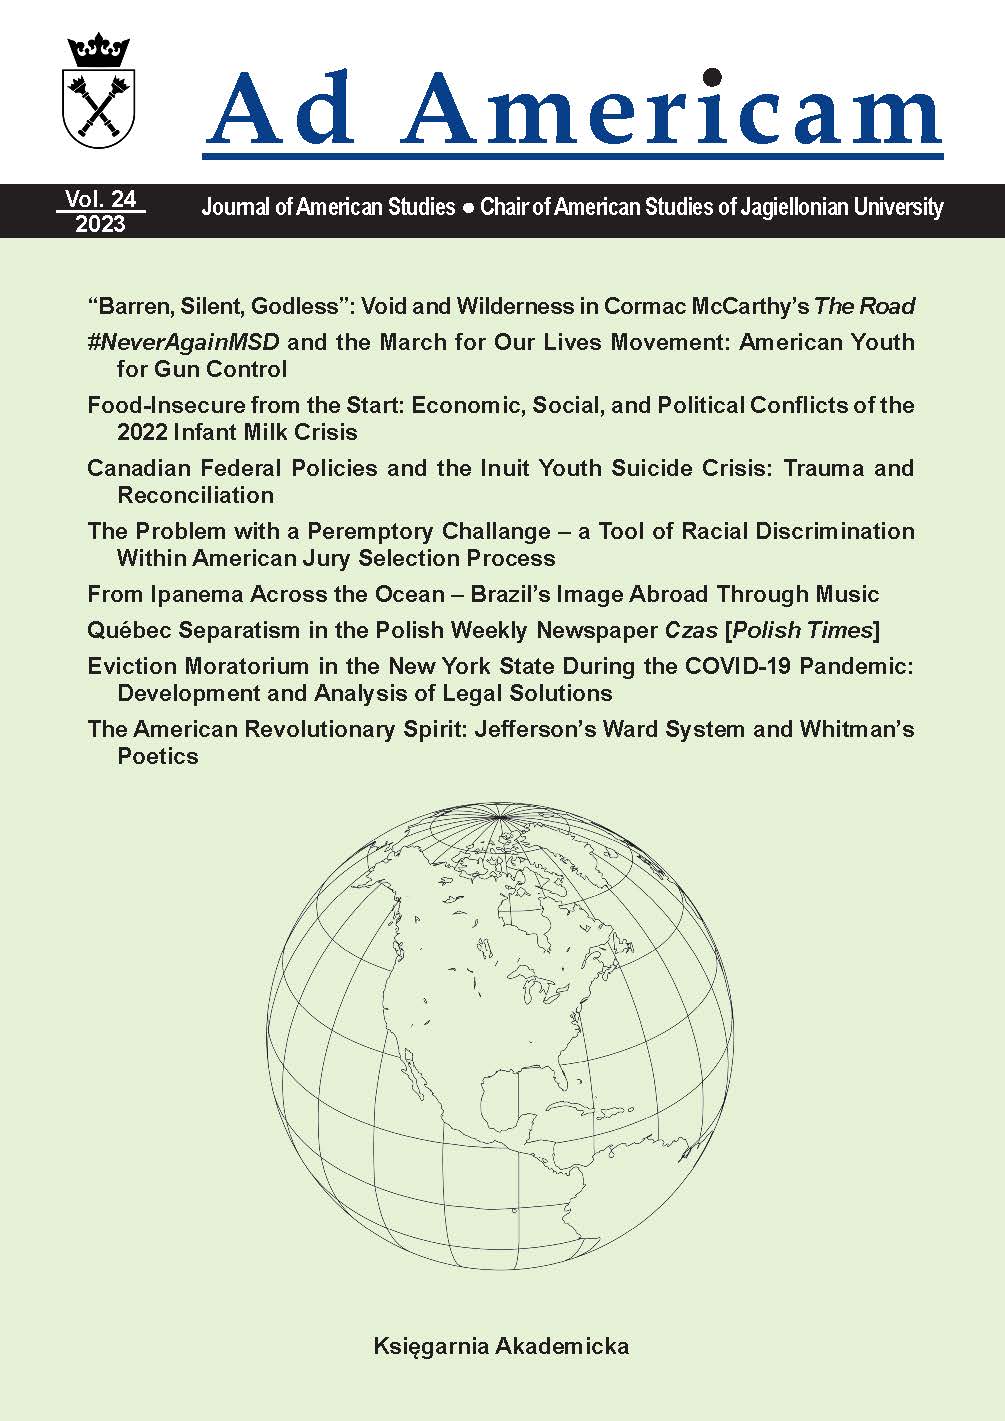 Eviction Moratorium
in the New York State
During the COVID-19 Pandemic Development and Analysis of Legal Solutions Cover Image